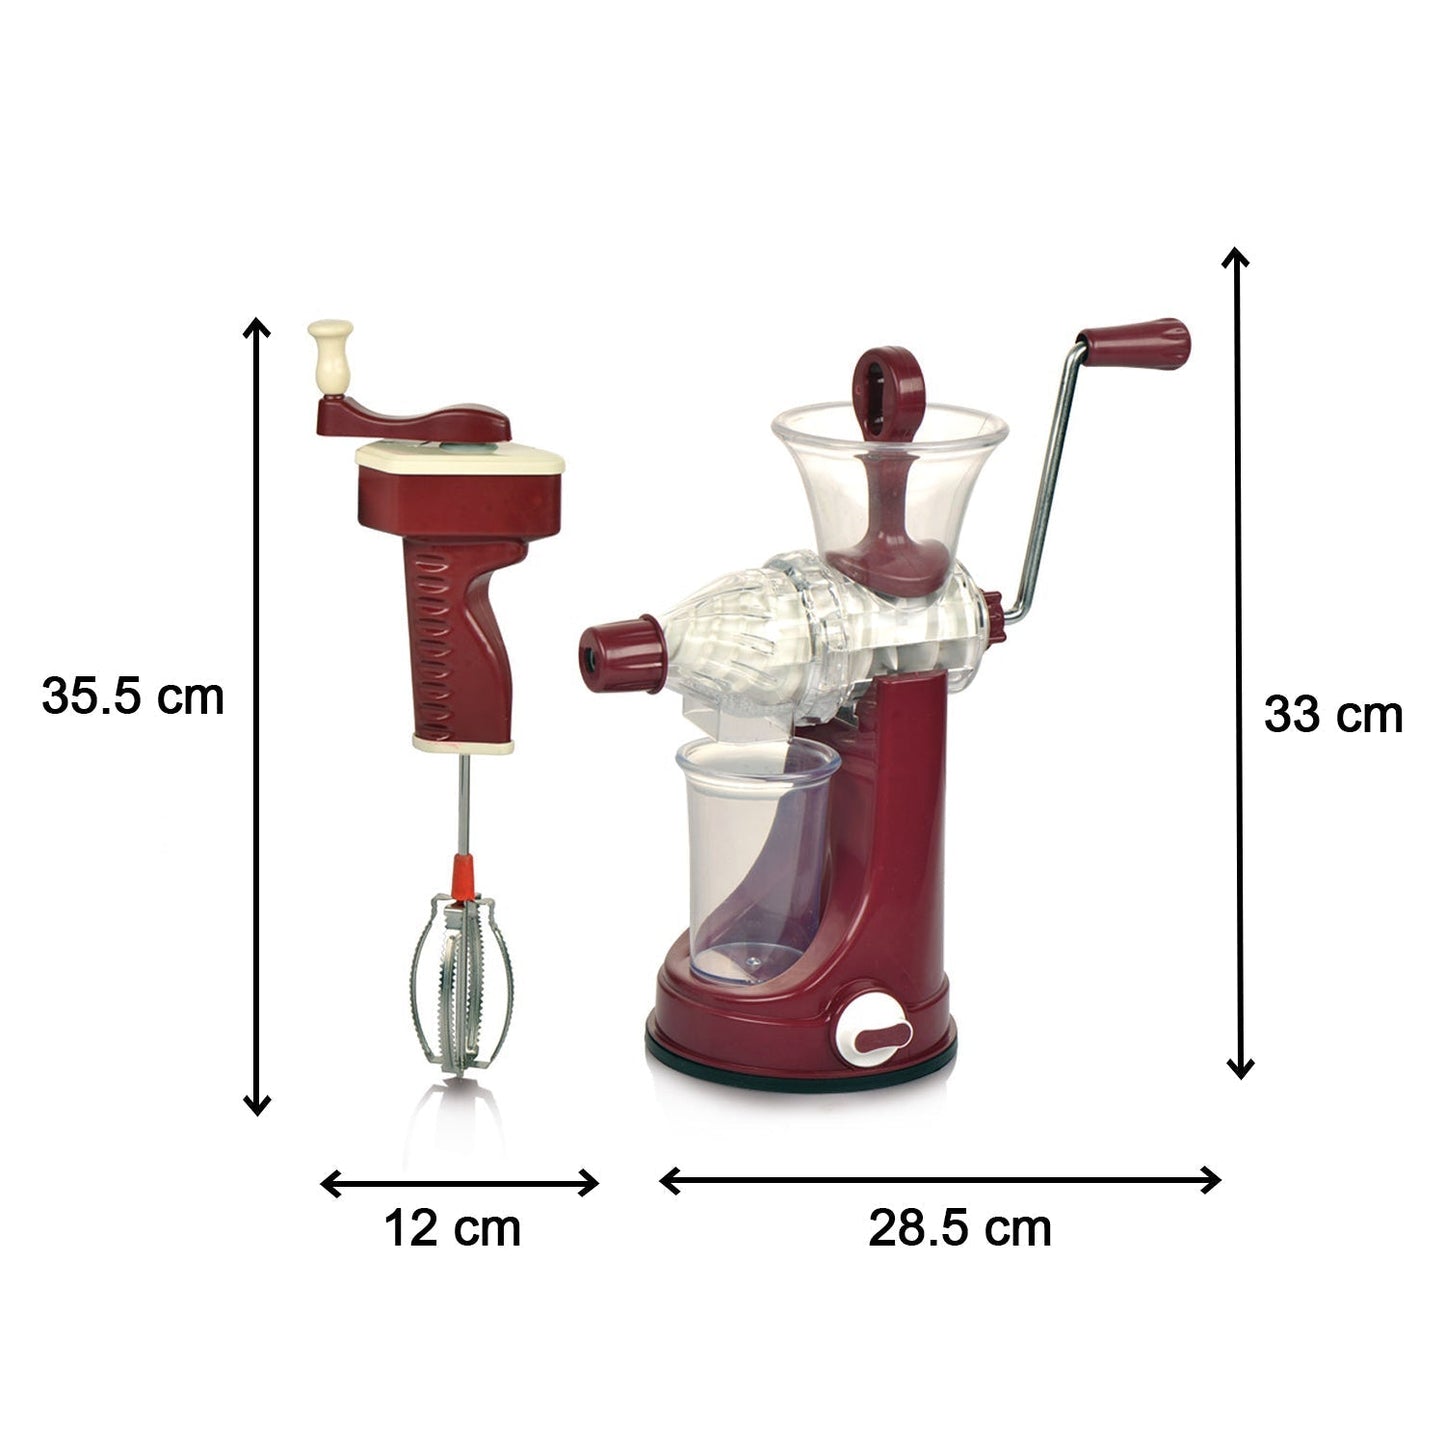 7017 ABS Juicer N Blender used in all kinds of household and kitchen purposes for making and blending of juices and beverages etc.